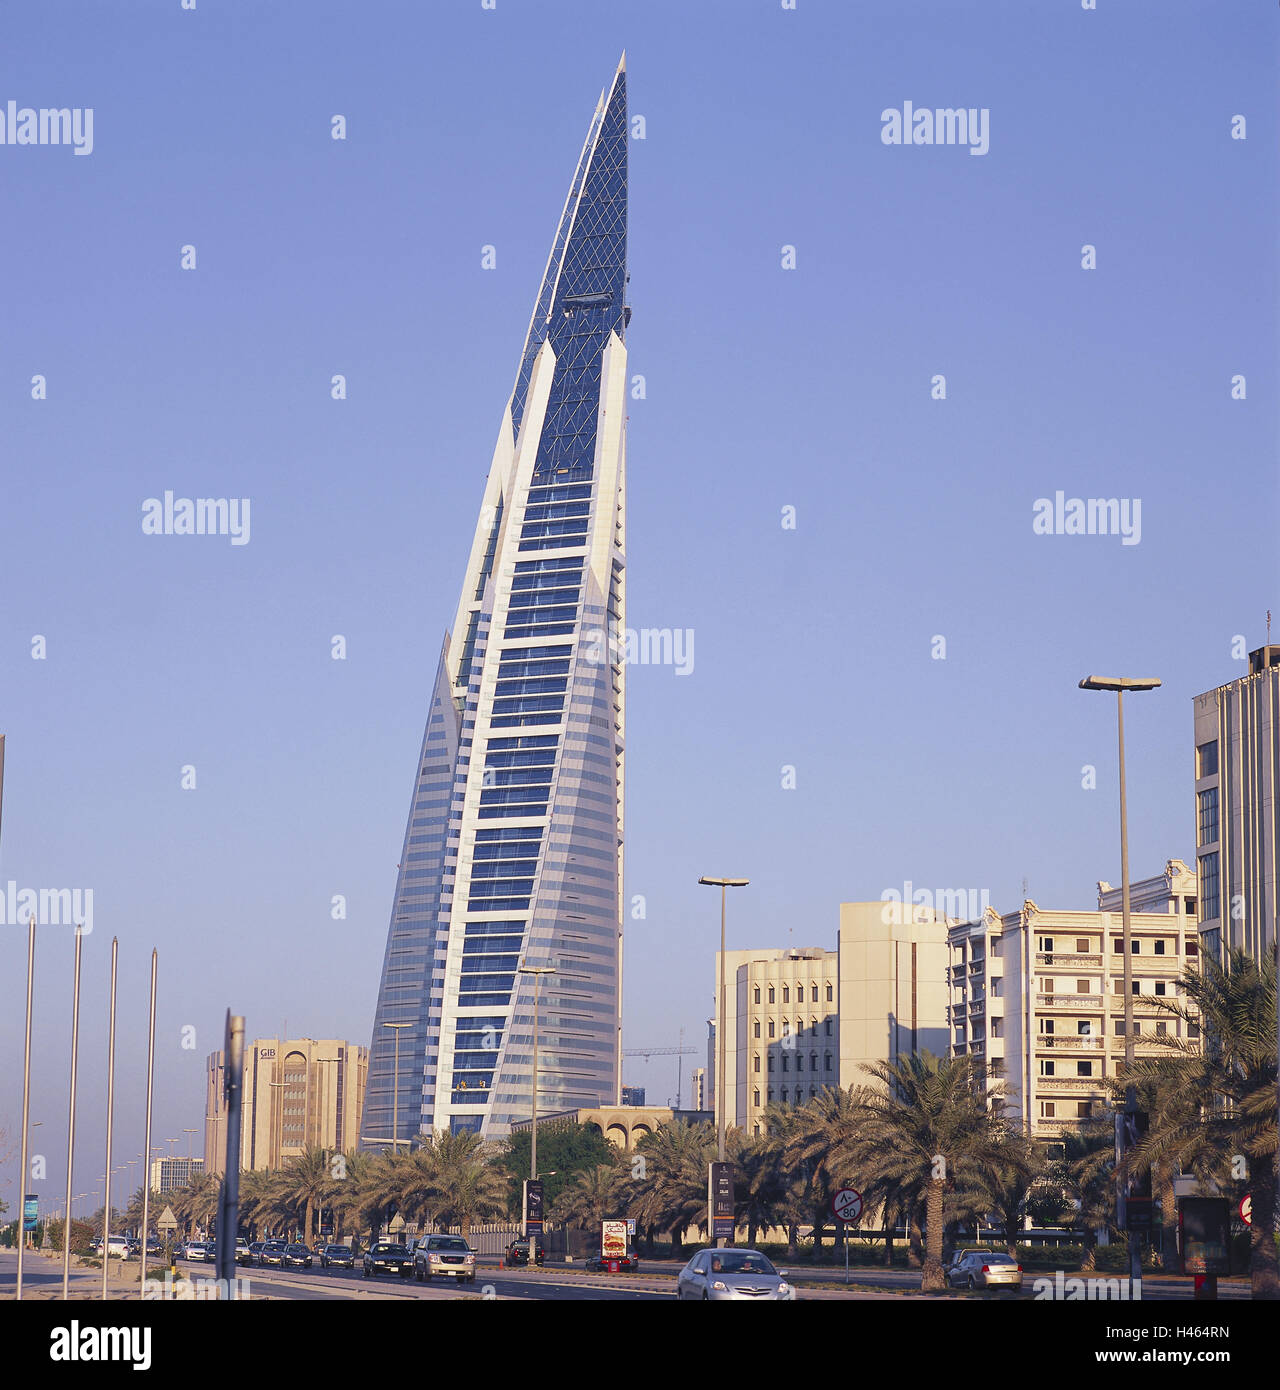 Bahrain, island Manamah, Manama, World Trade centre, island state, sheikdom, destination, town, capital, building, structure, architecture, business premises, skyscraper, facade, glass front, architecture, heaven, cloudless, towers, street, traffic, cars, palms, Stock Photo